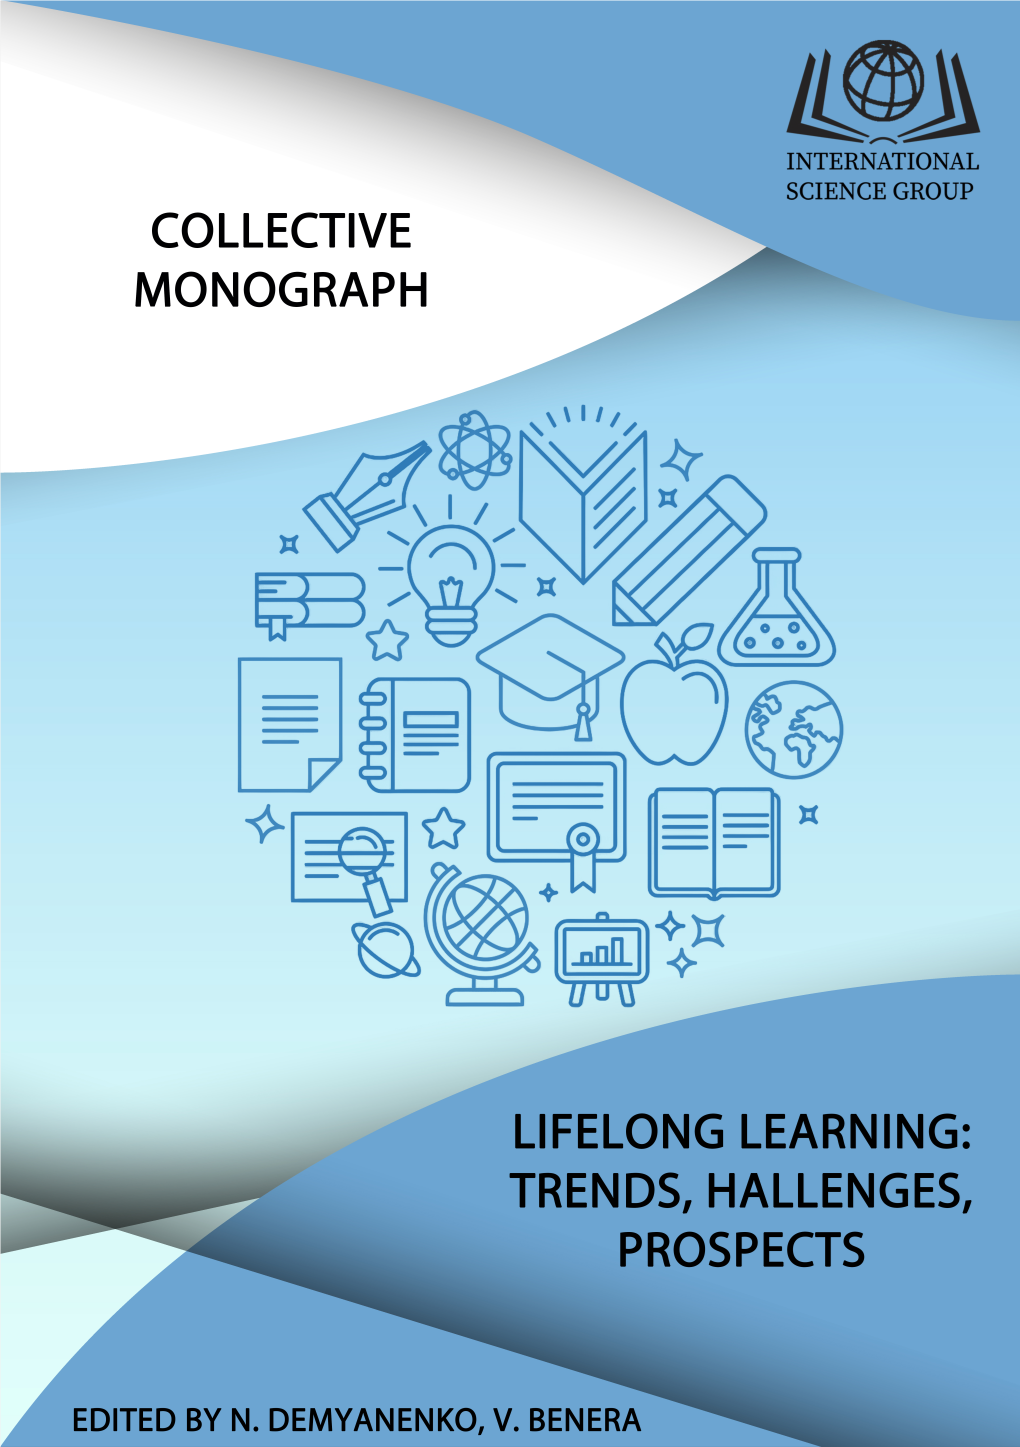 Lifelong Learning: Trends, Hallenges, Prospects